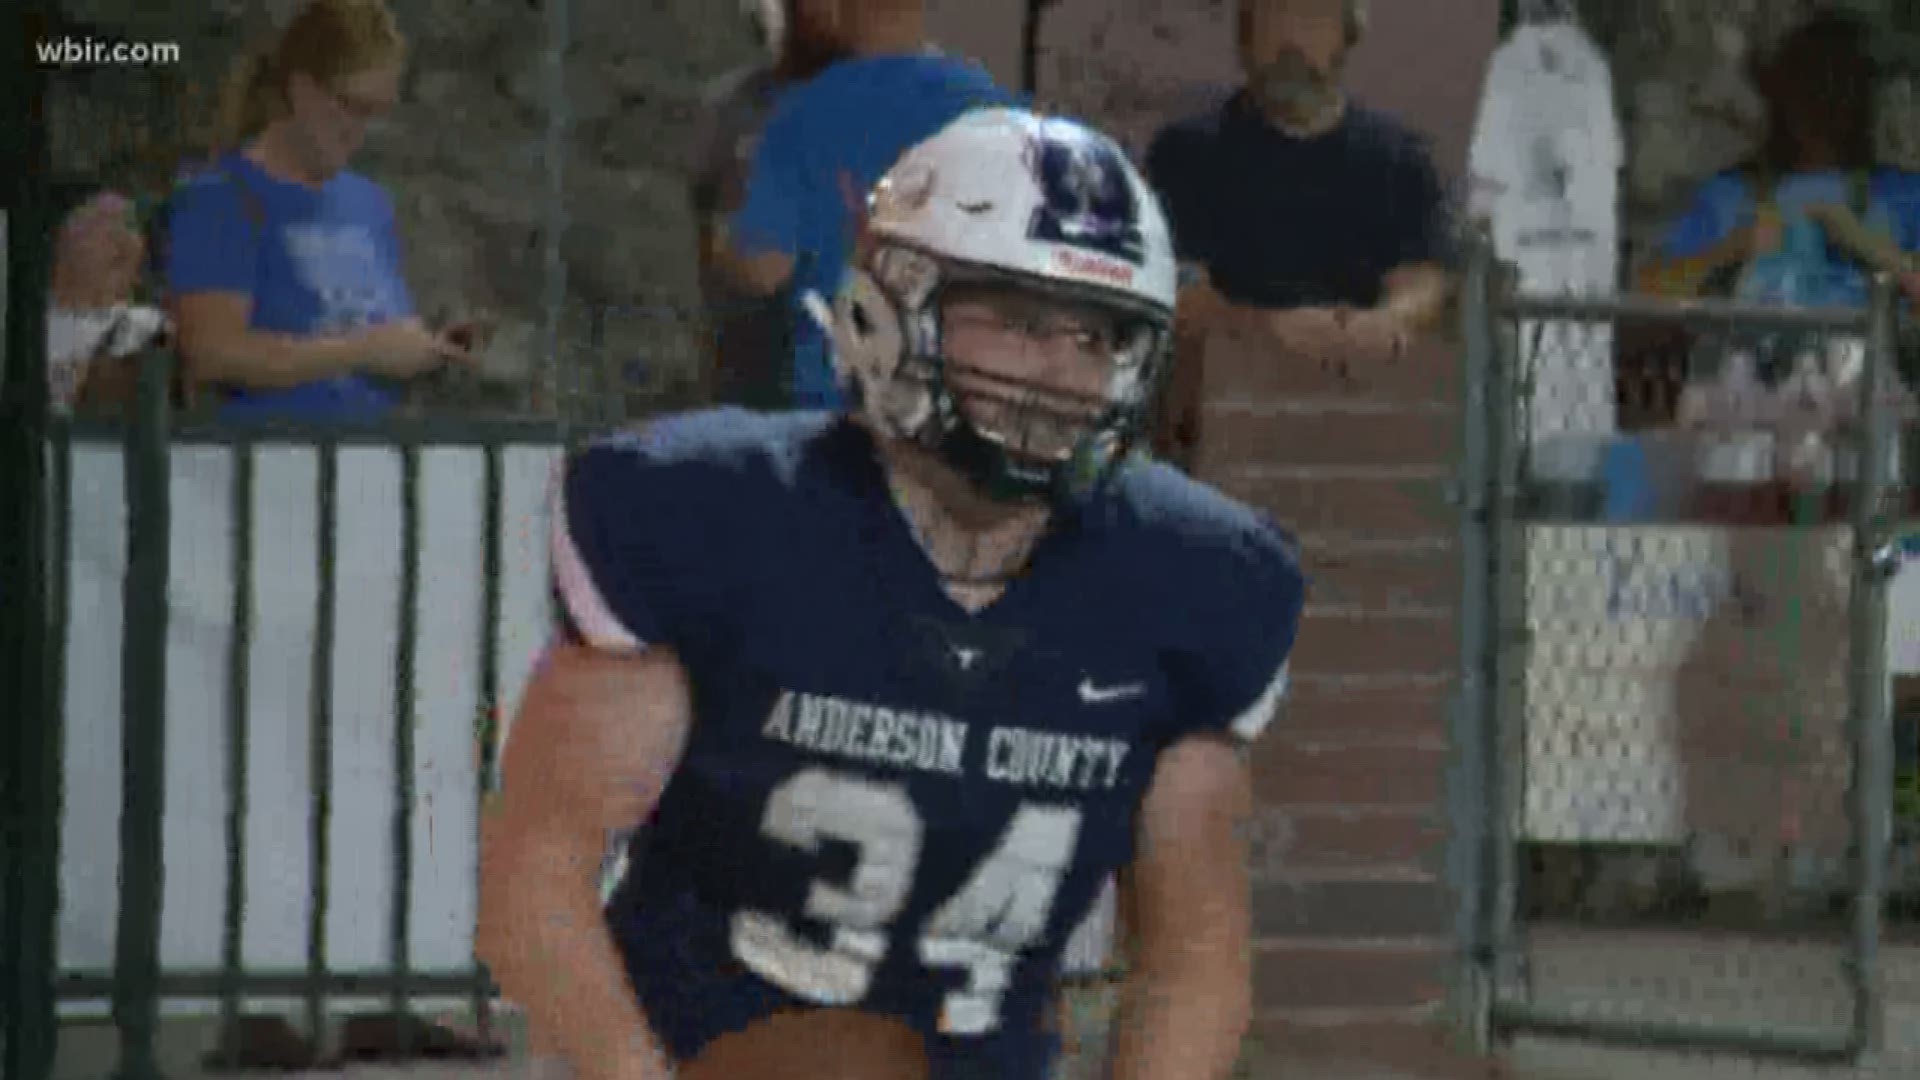 Anderson County wins big over Jefferson County.